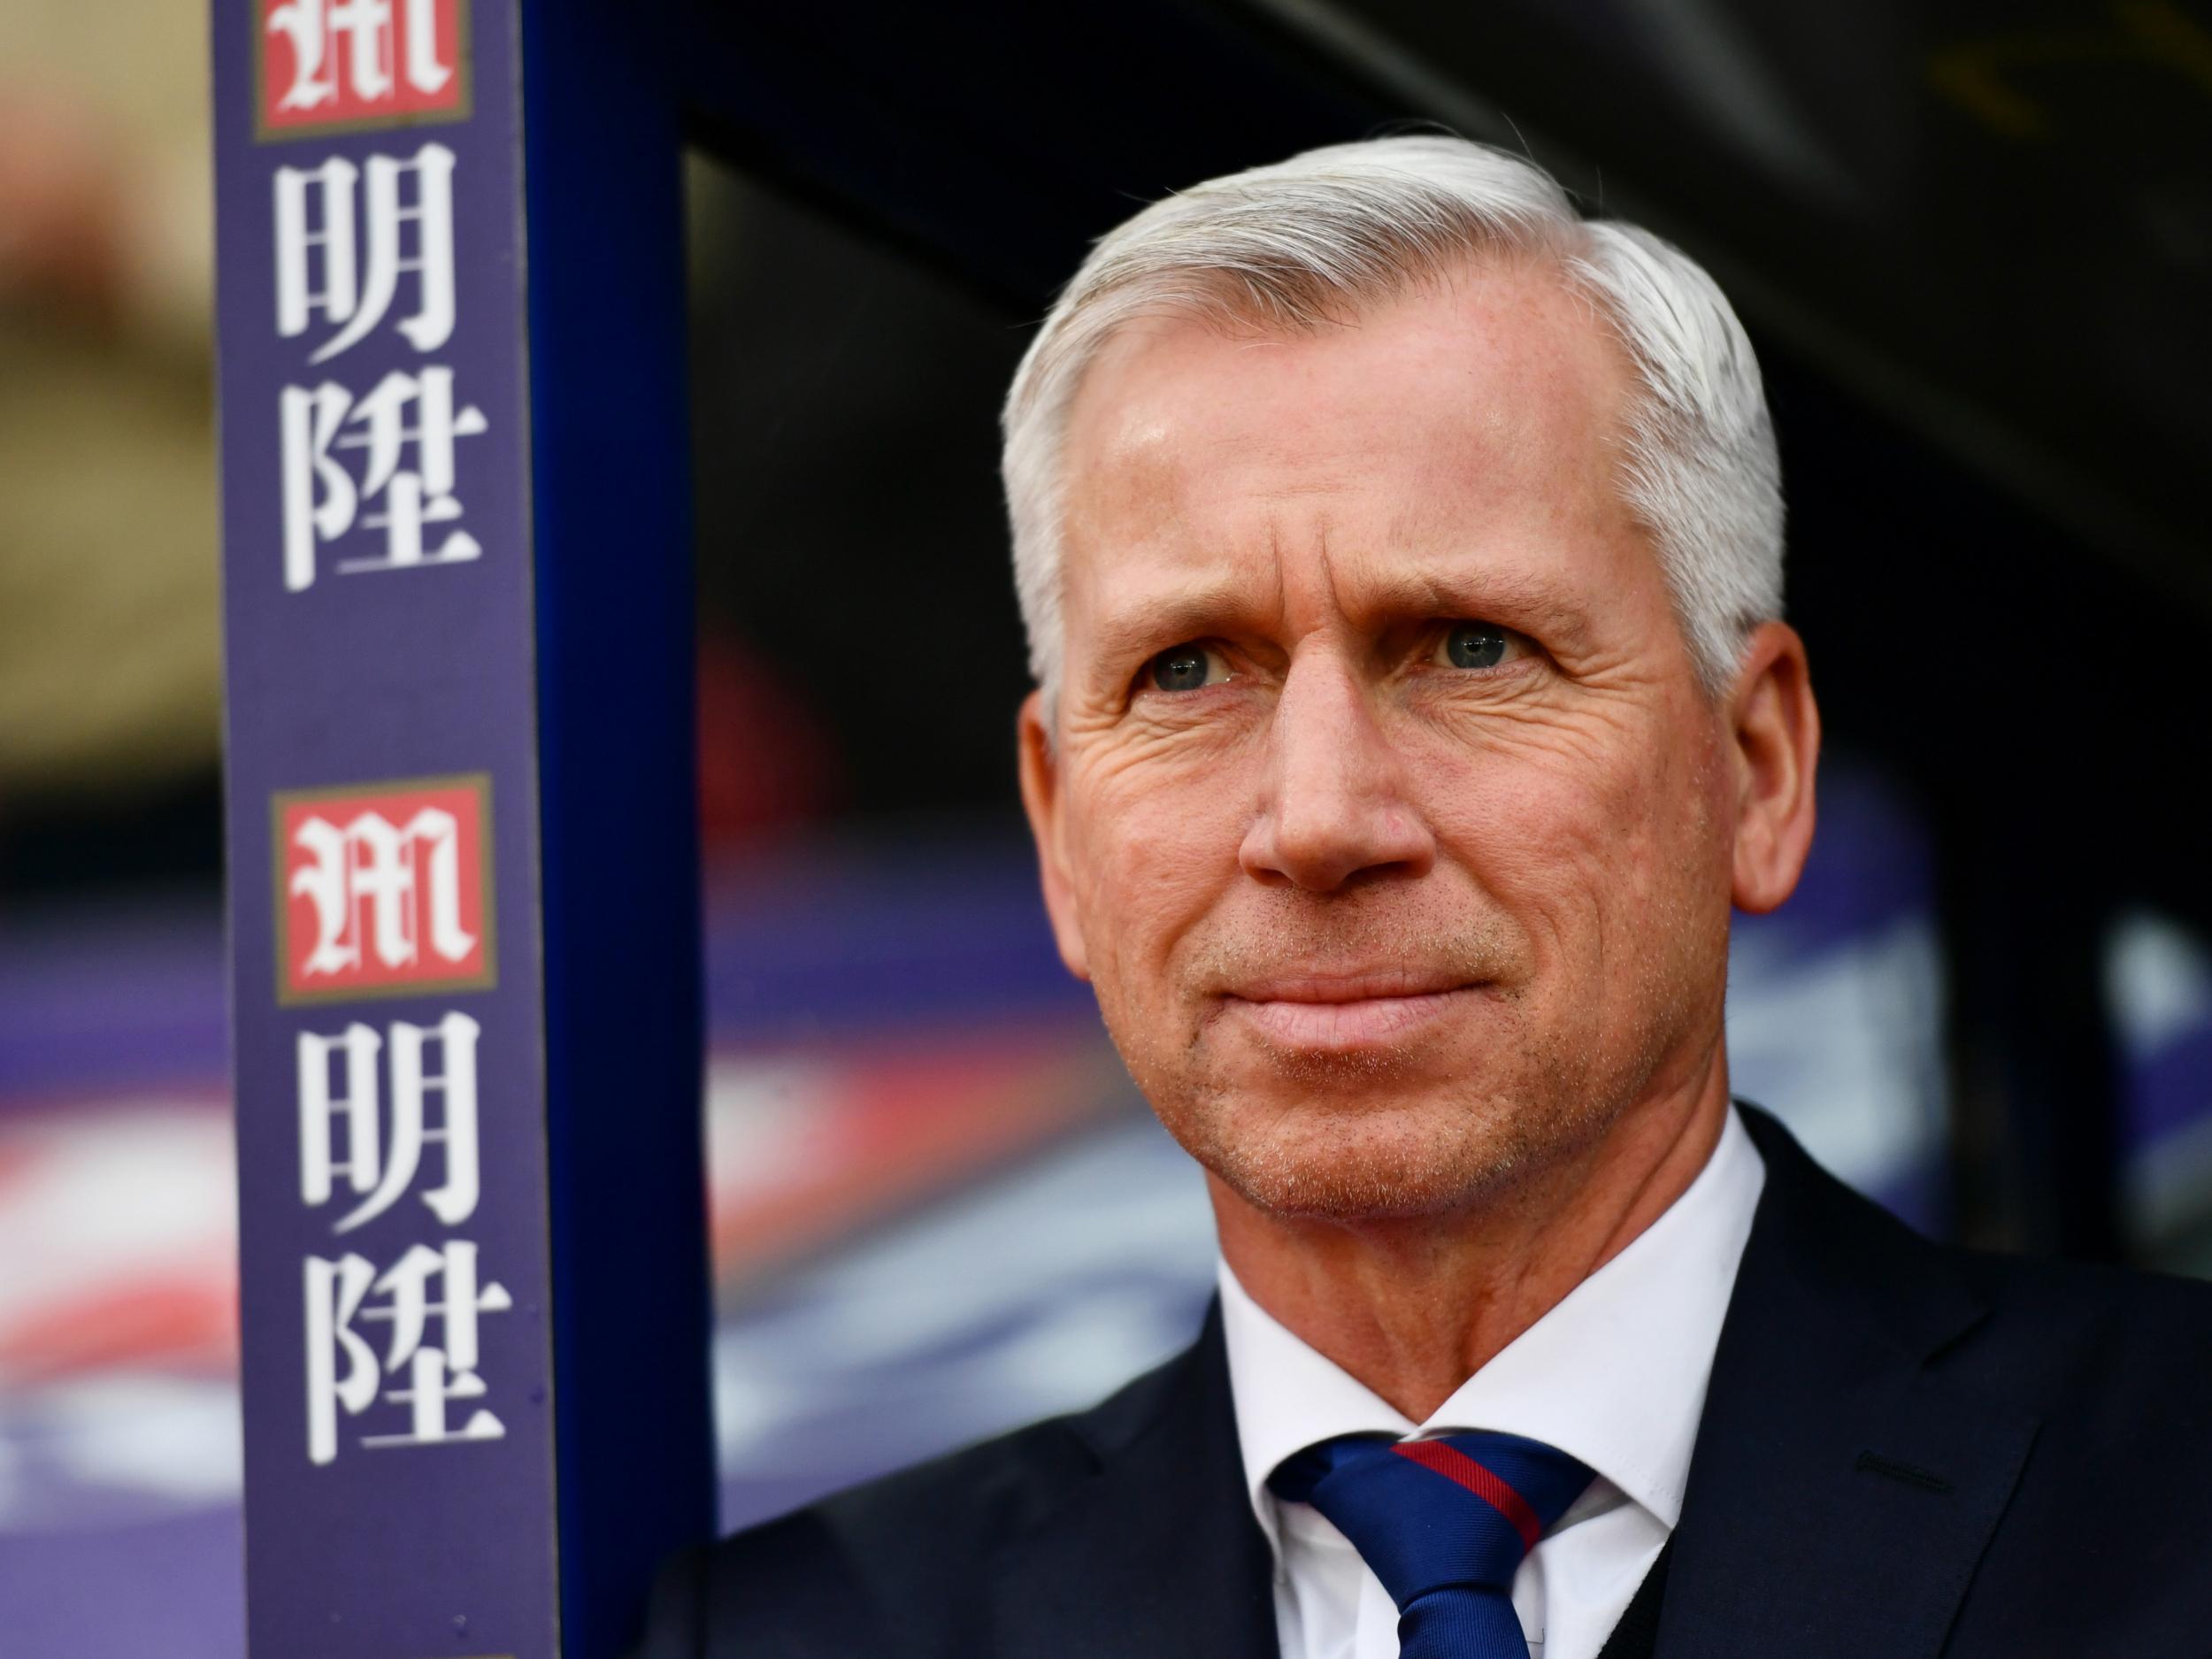 Pardew was sacked by Palace last December